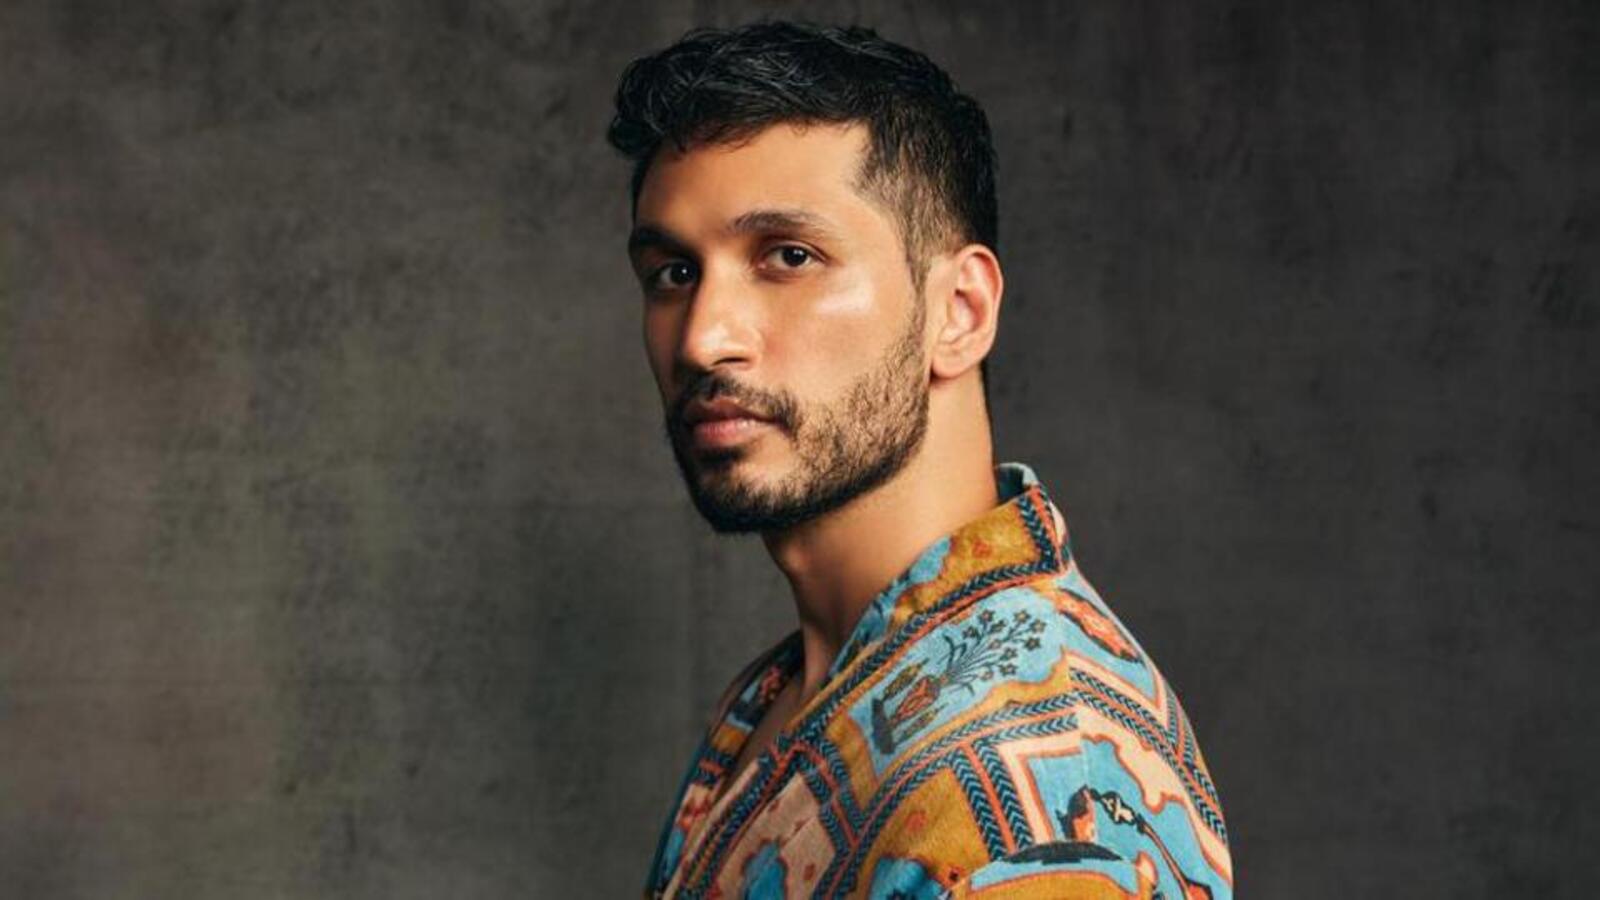 Arjun Kanungo bets on paid subscriptions to solve royalty issues